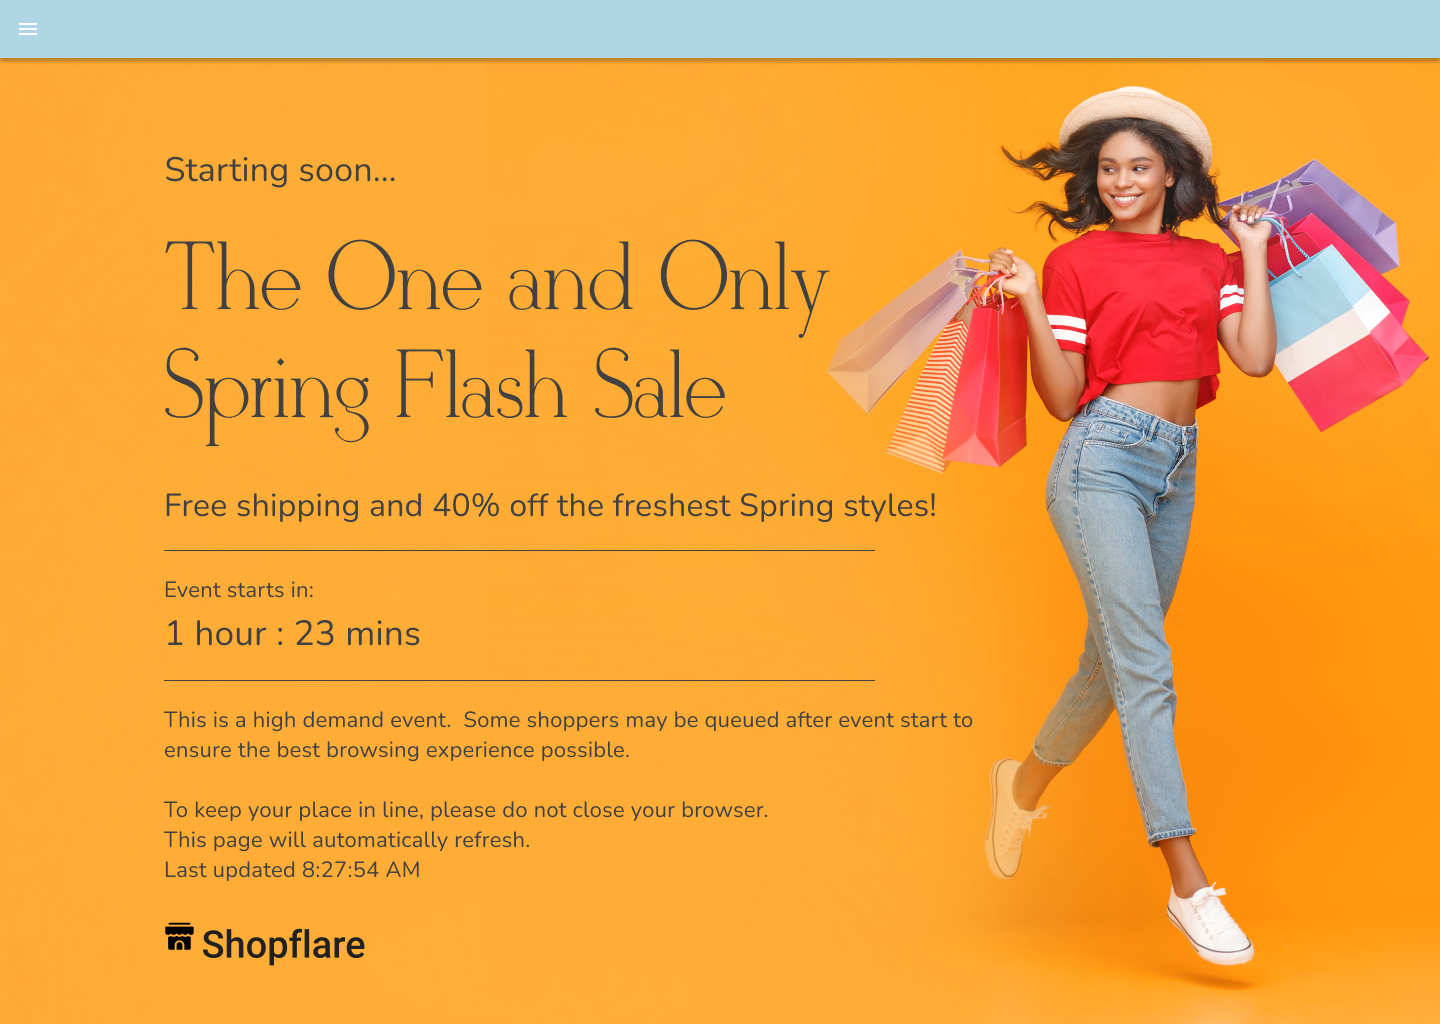 Shopflare’s pre-queuing page is customized for the brand and the flash sale. Shoppers are informed of the time until the event starts as well as are reassured that the page is automatically refreshing.